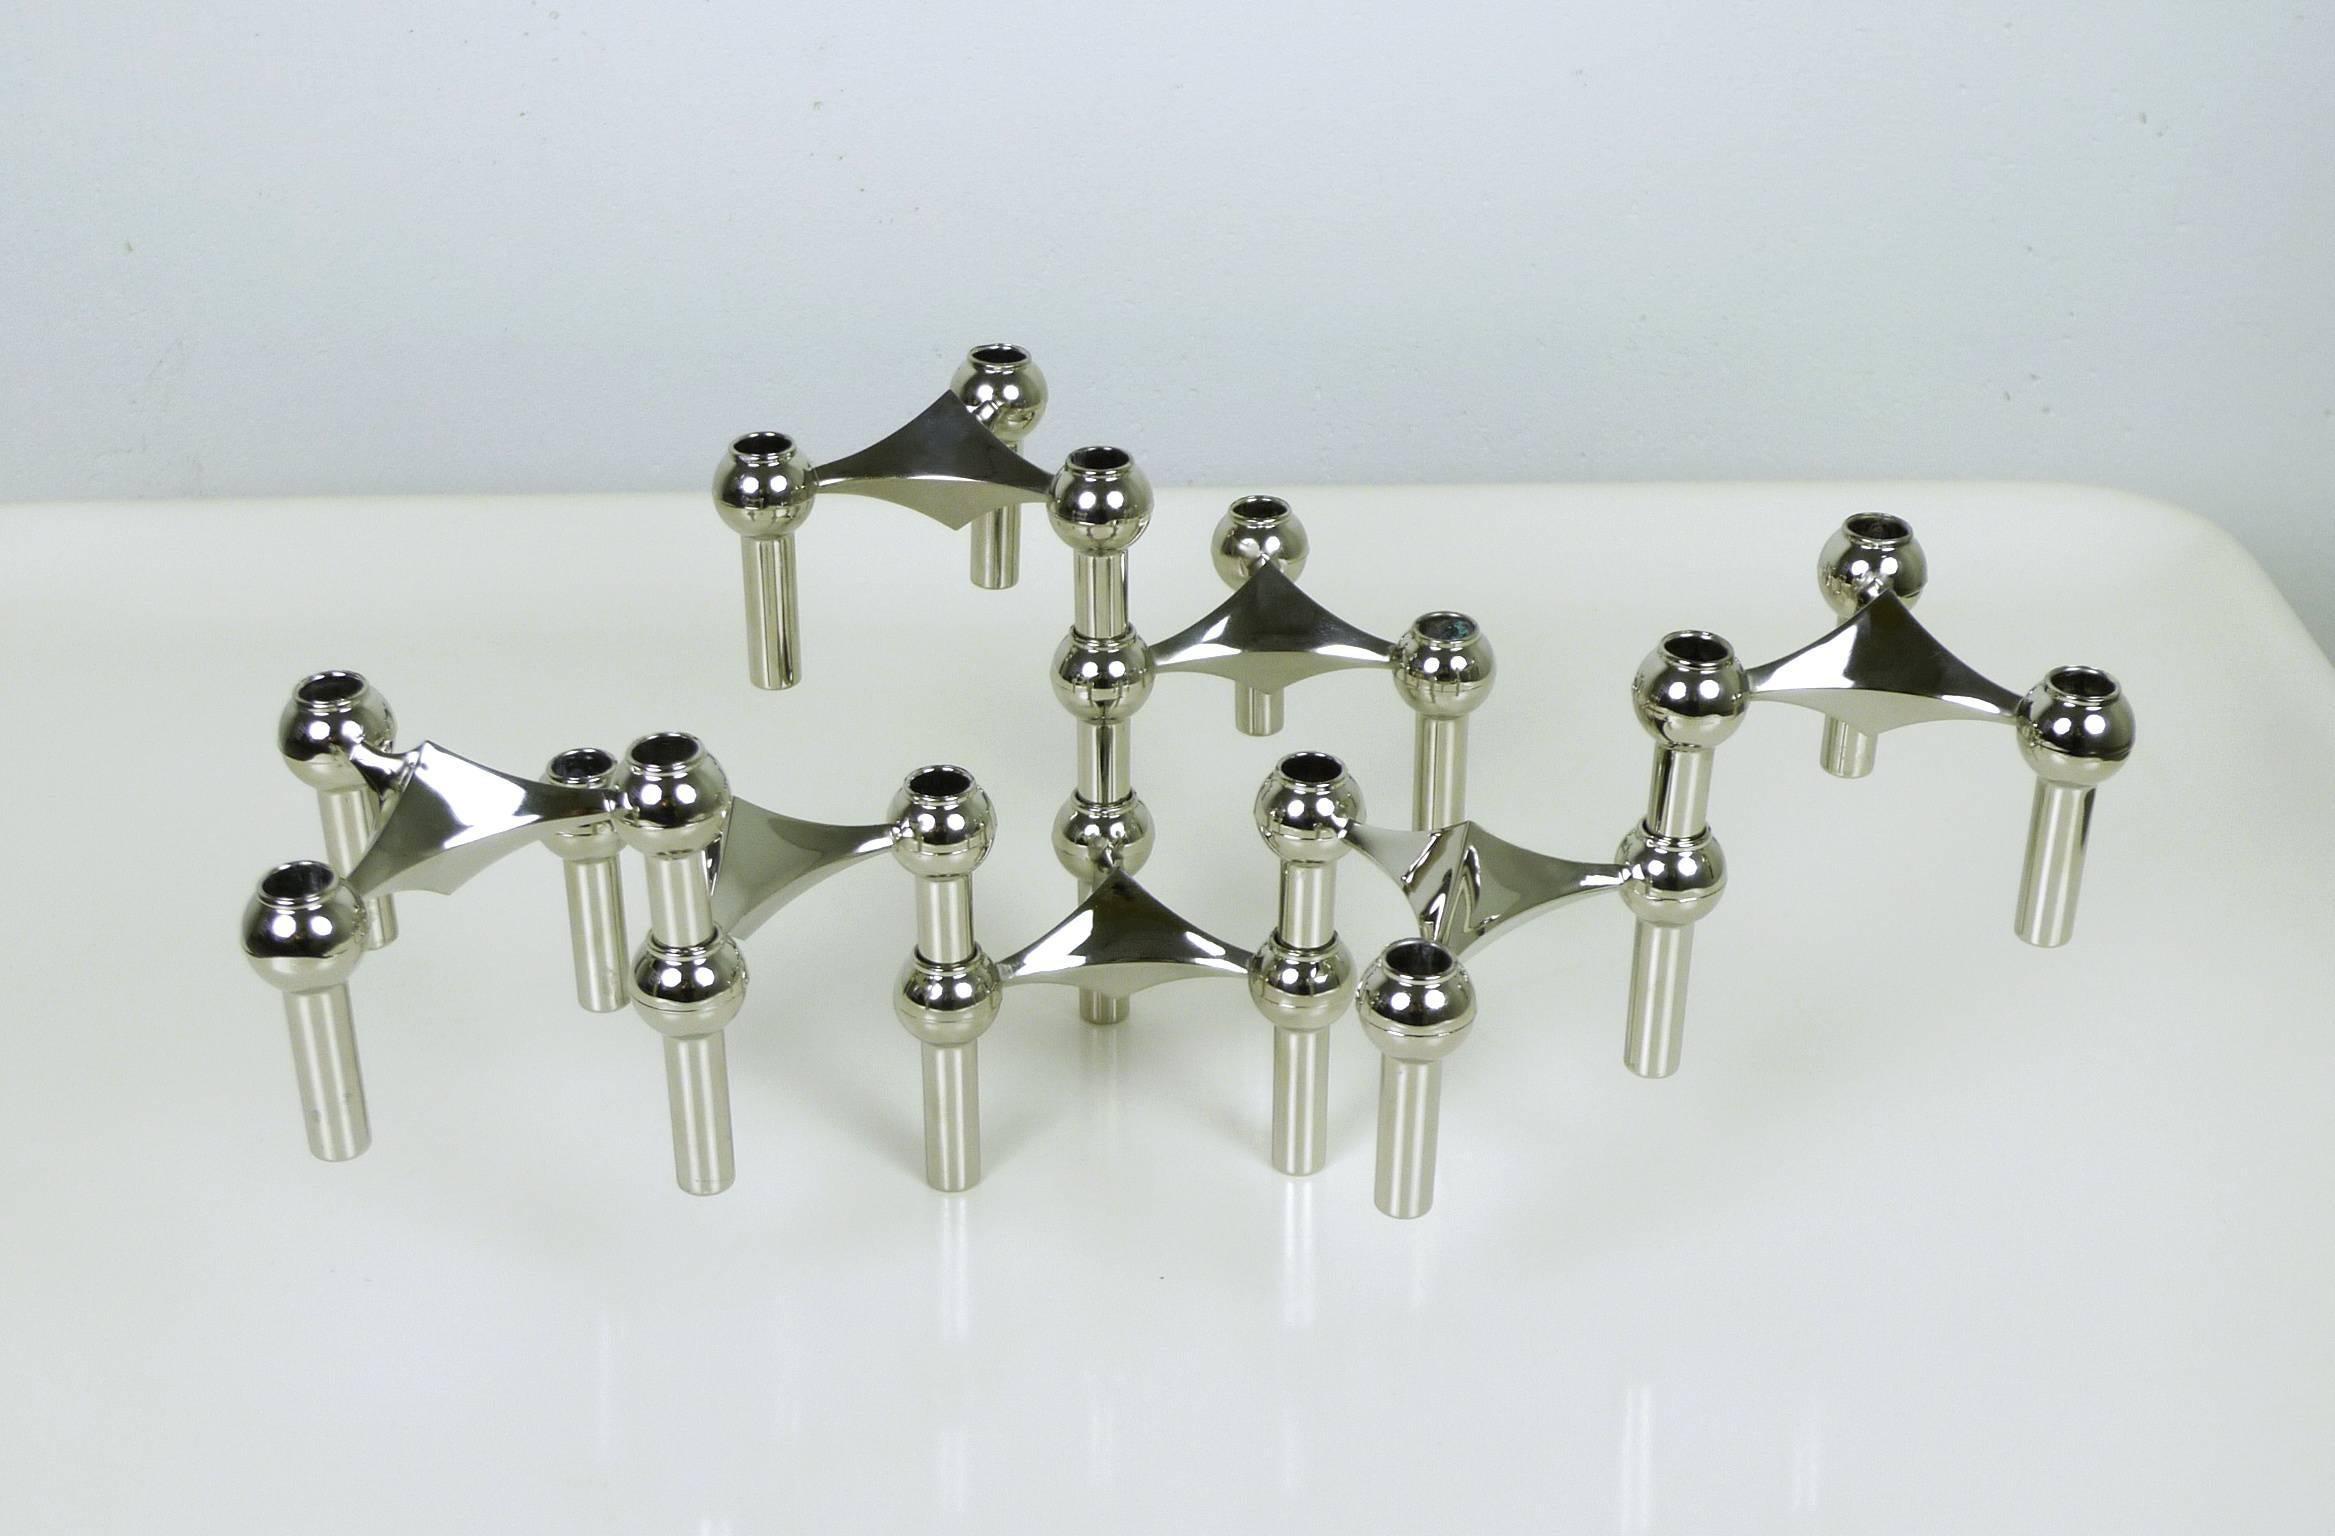 Metal S22 Candlestick Holders with Table Candles from Fritz Nagel, Germany, 1960s For Sale